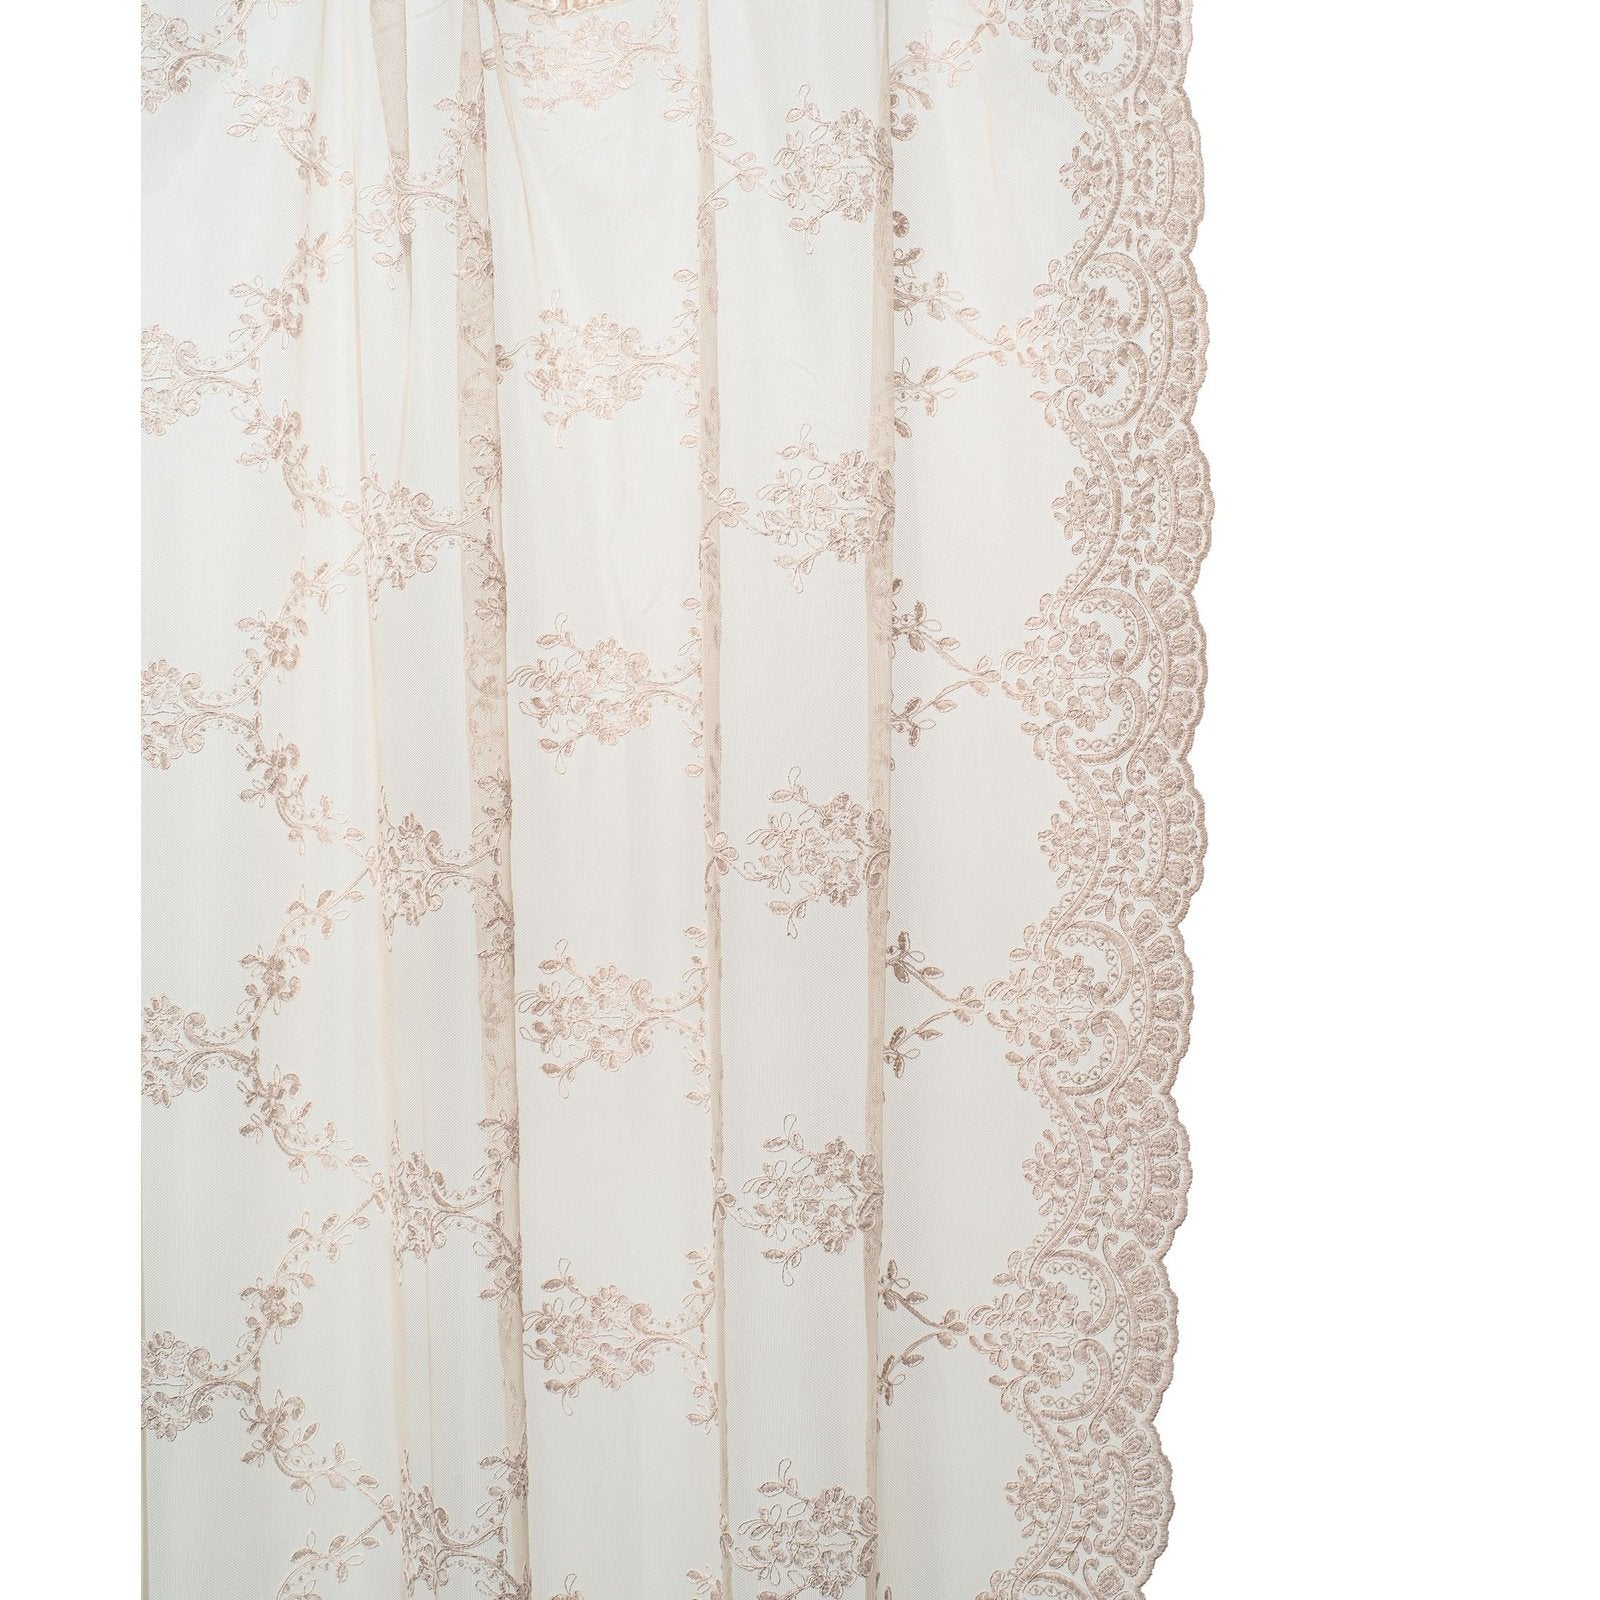 Scalloped edges and velvet ribbon add a touch of elegance to the Amelia Lace Curtain.